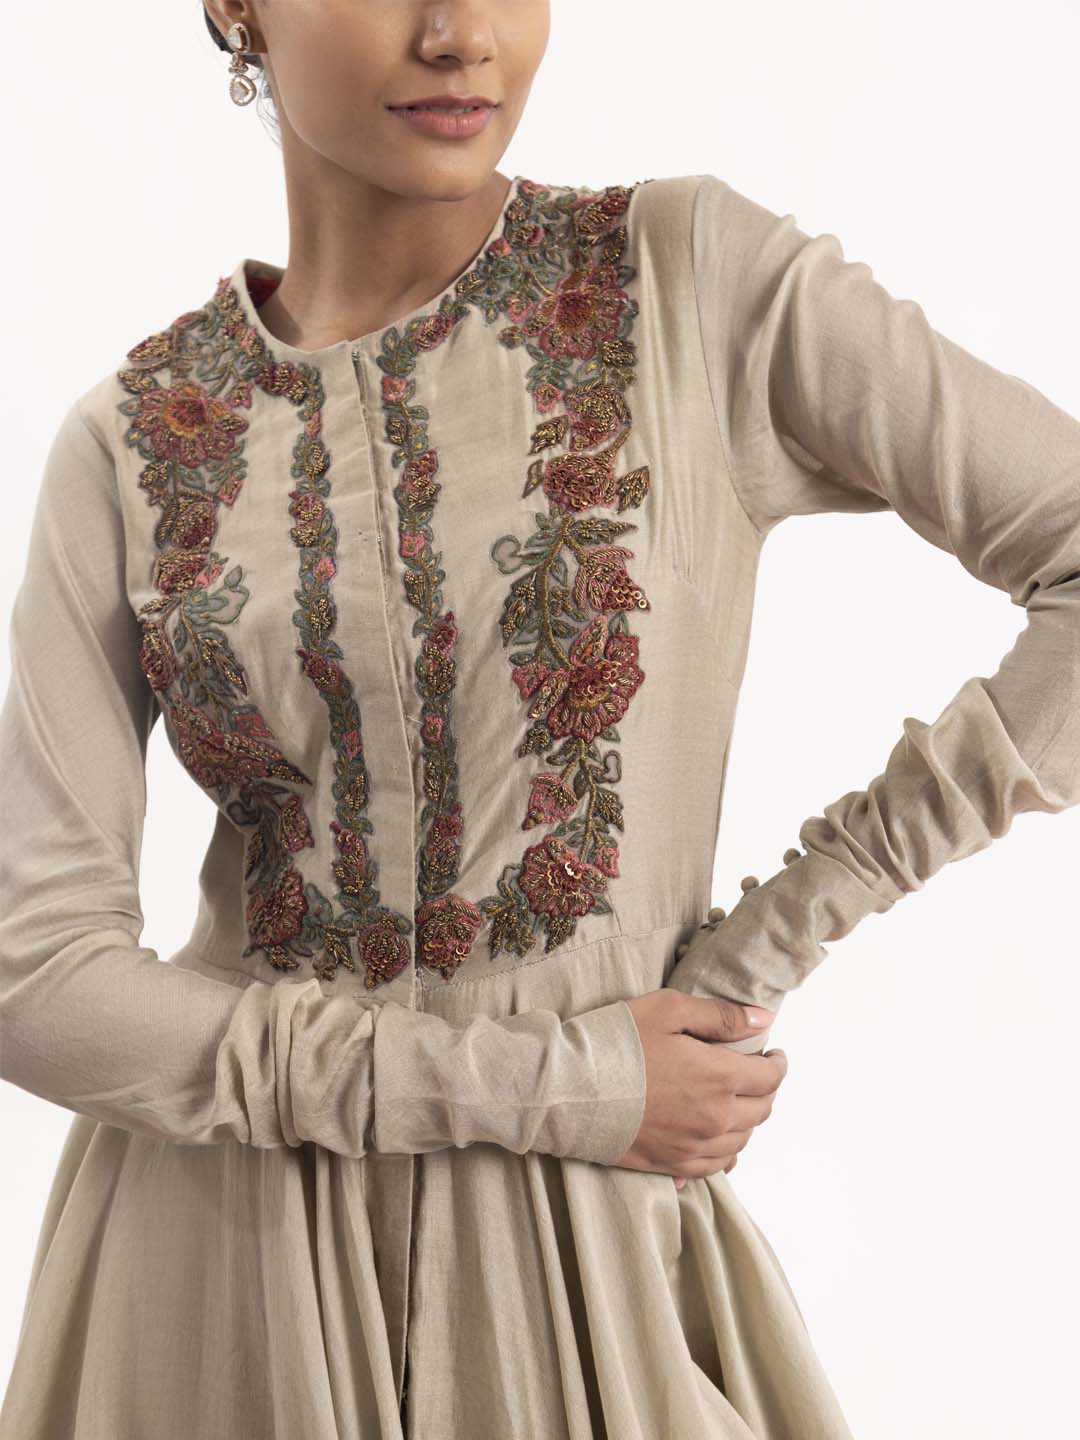 Anarkali meticulously embroidered by zardozi and appliqué work.